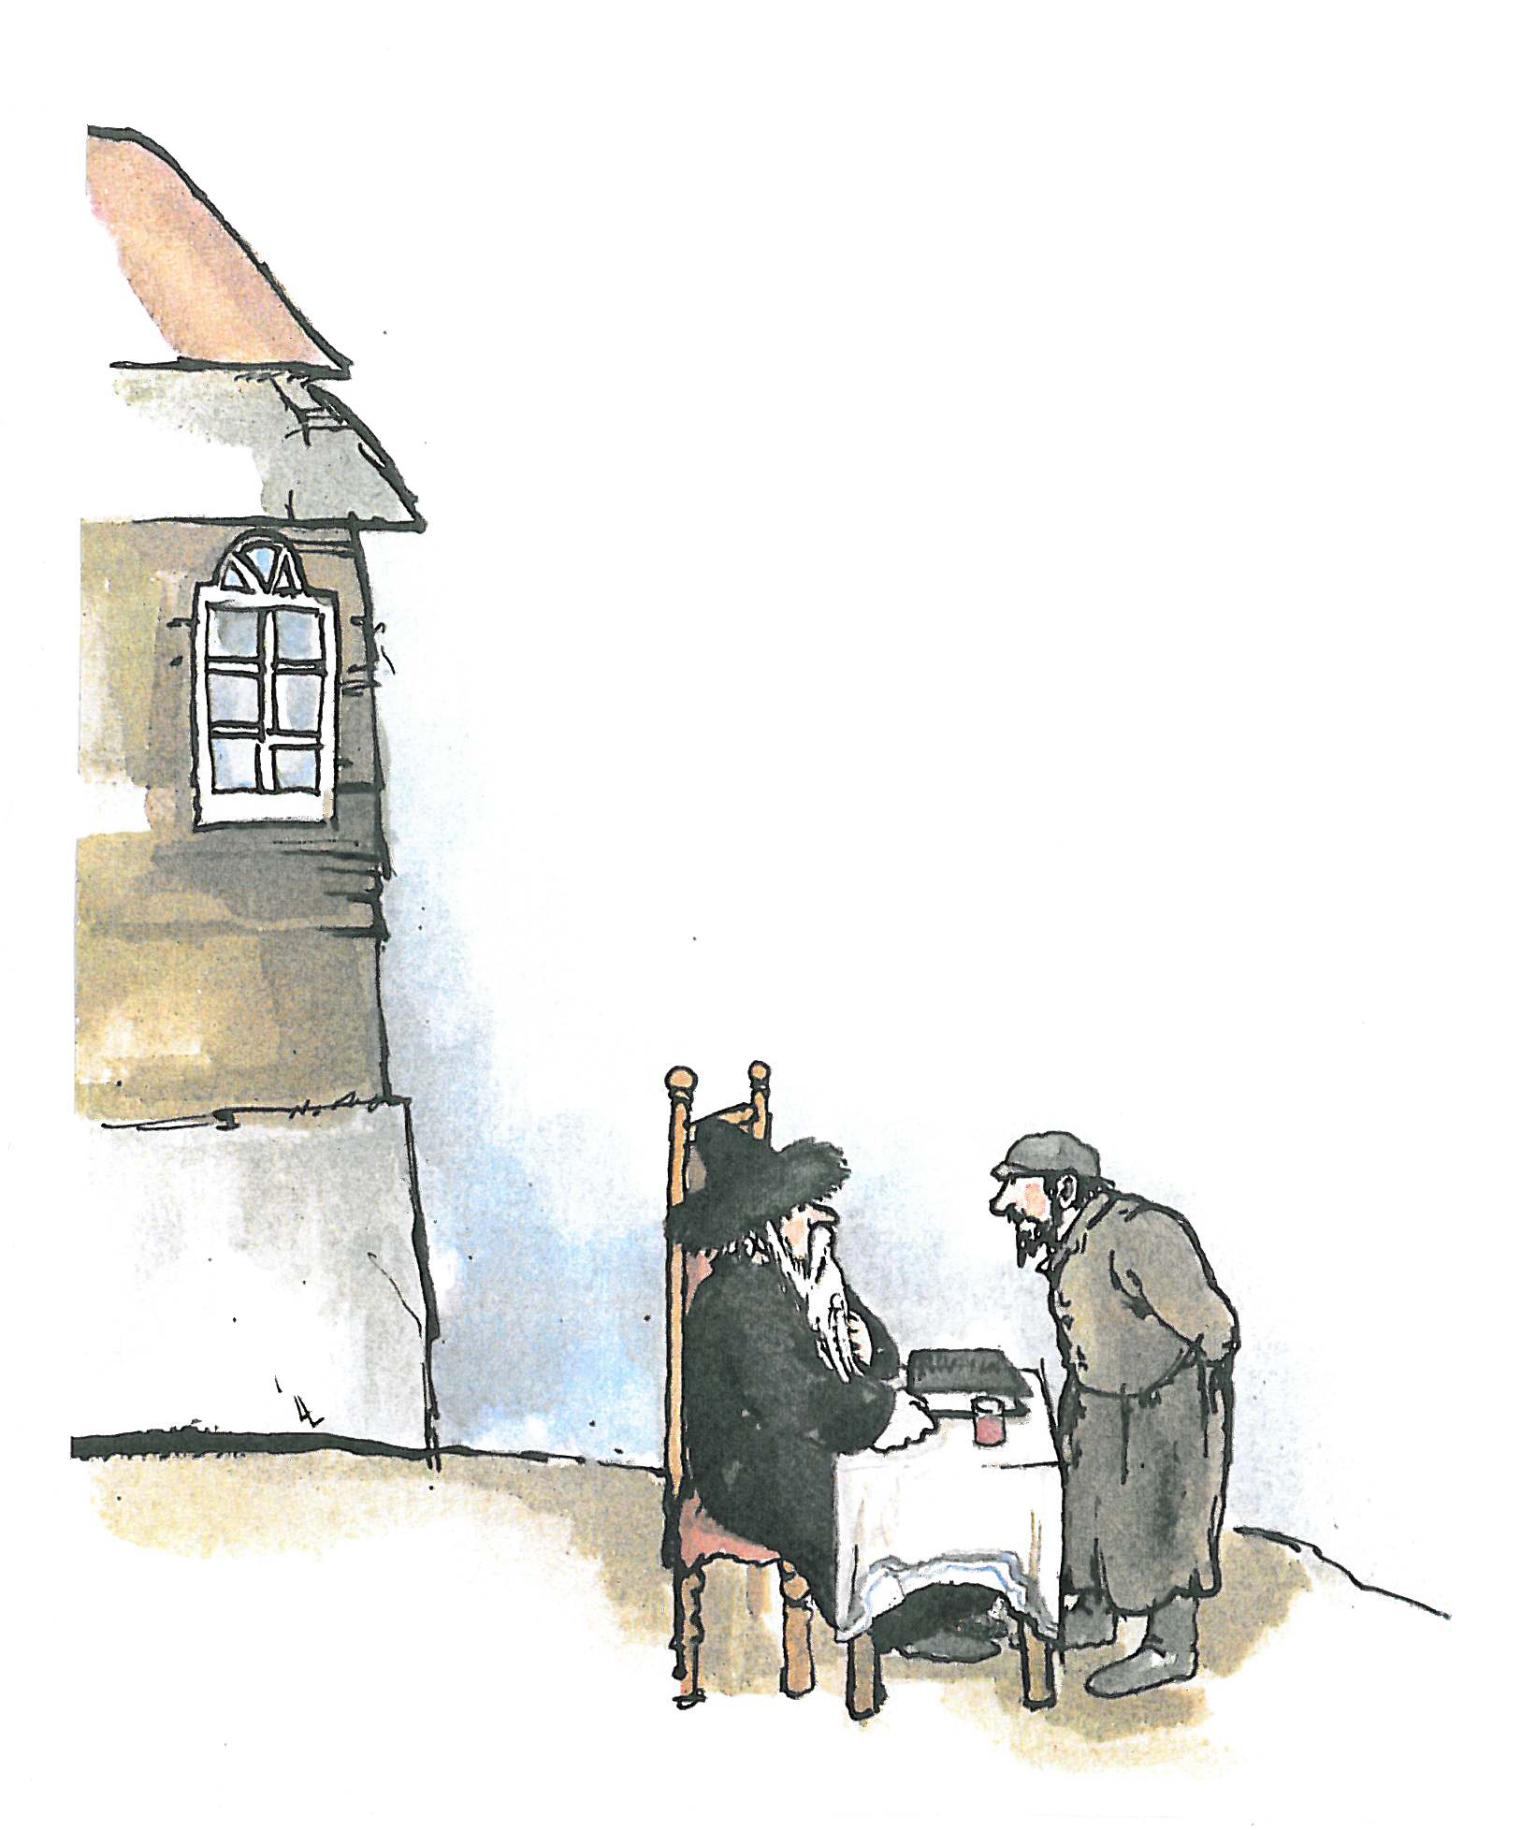 Painting of bearded man in hat sitting at a table with another man leaning across to talk to him, and exterior of building in the background.